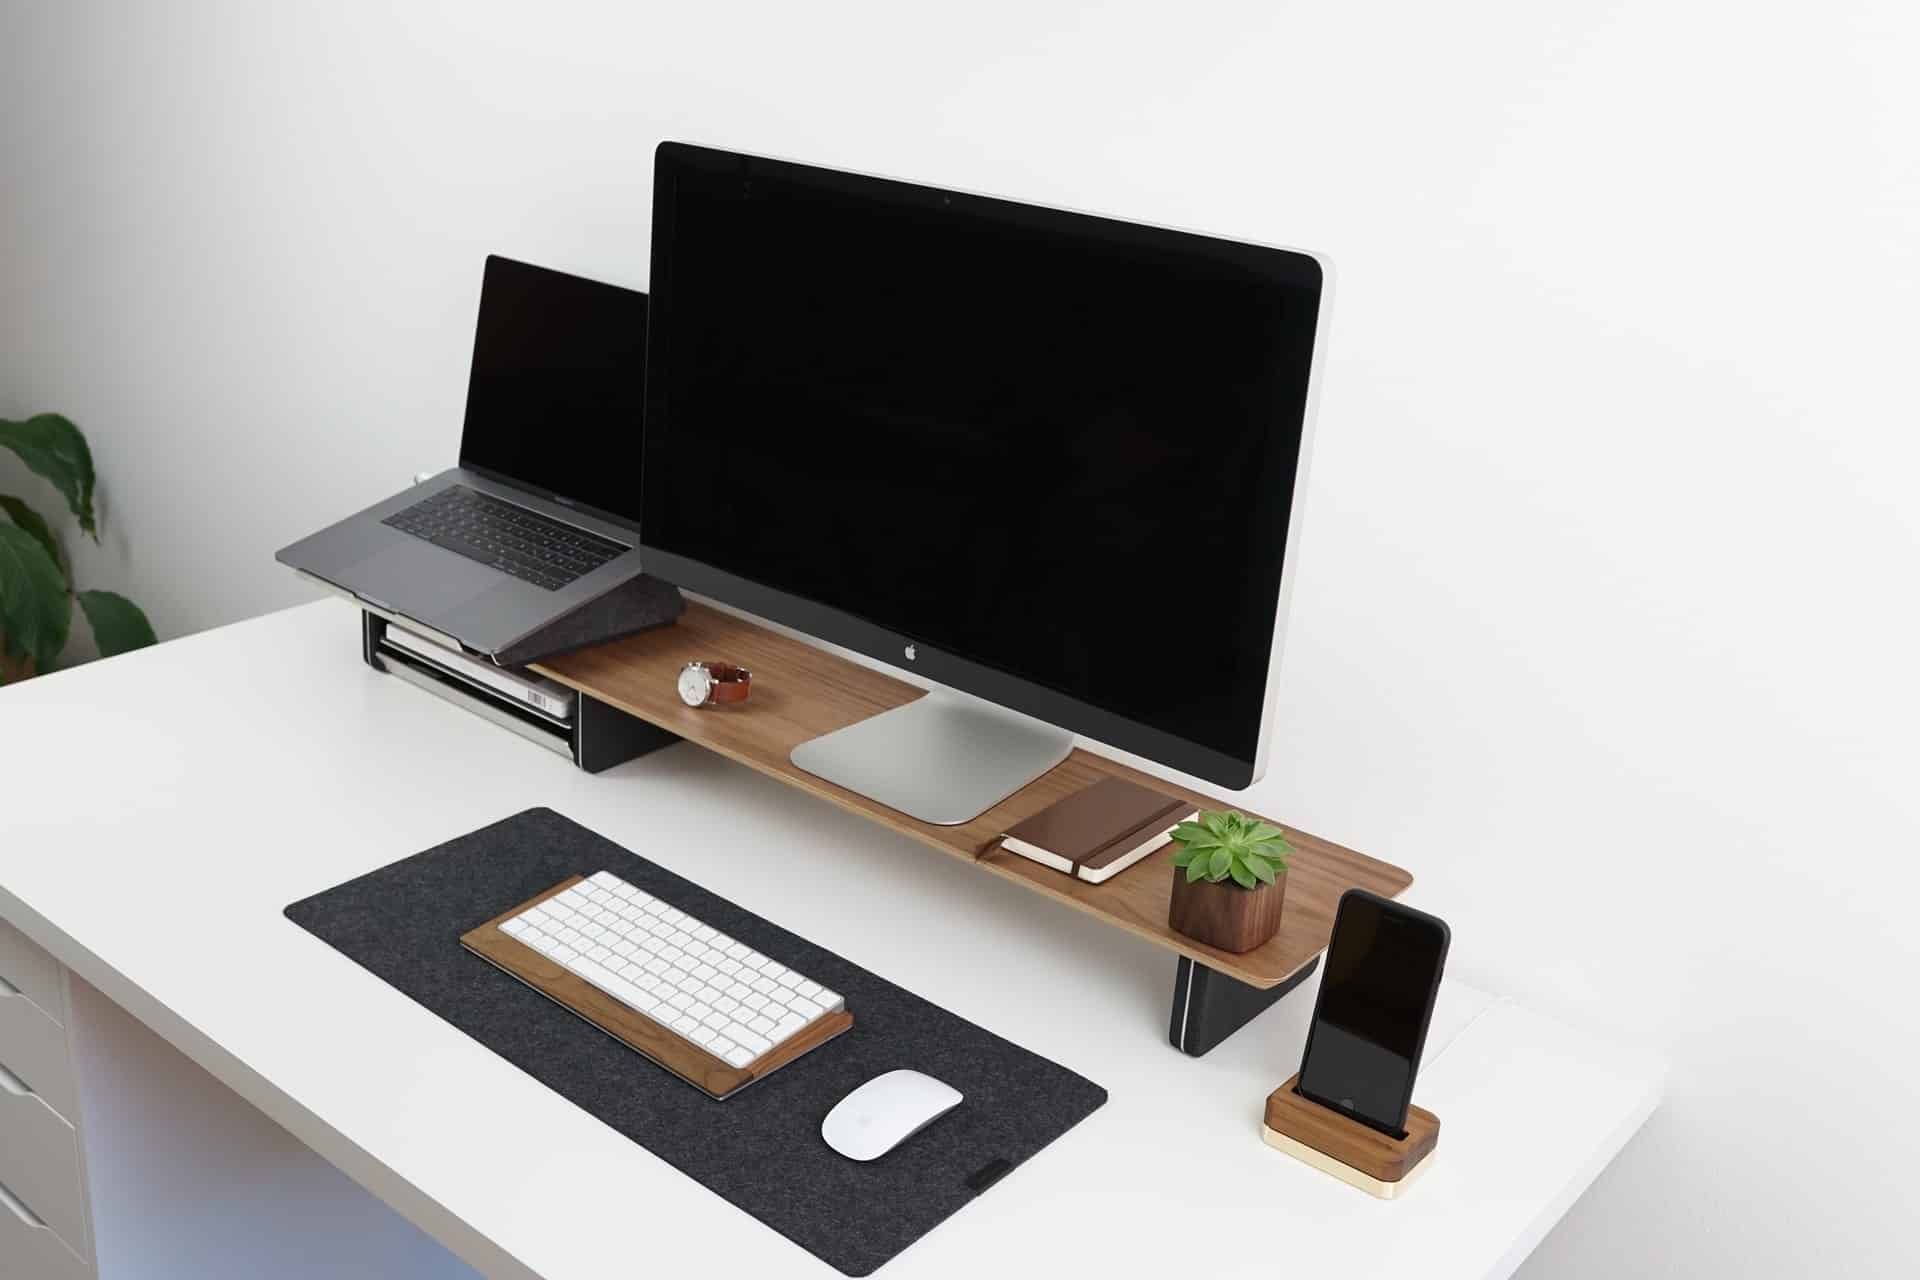 Desk tidy: tips if you’re working from home